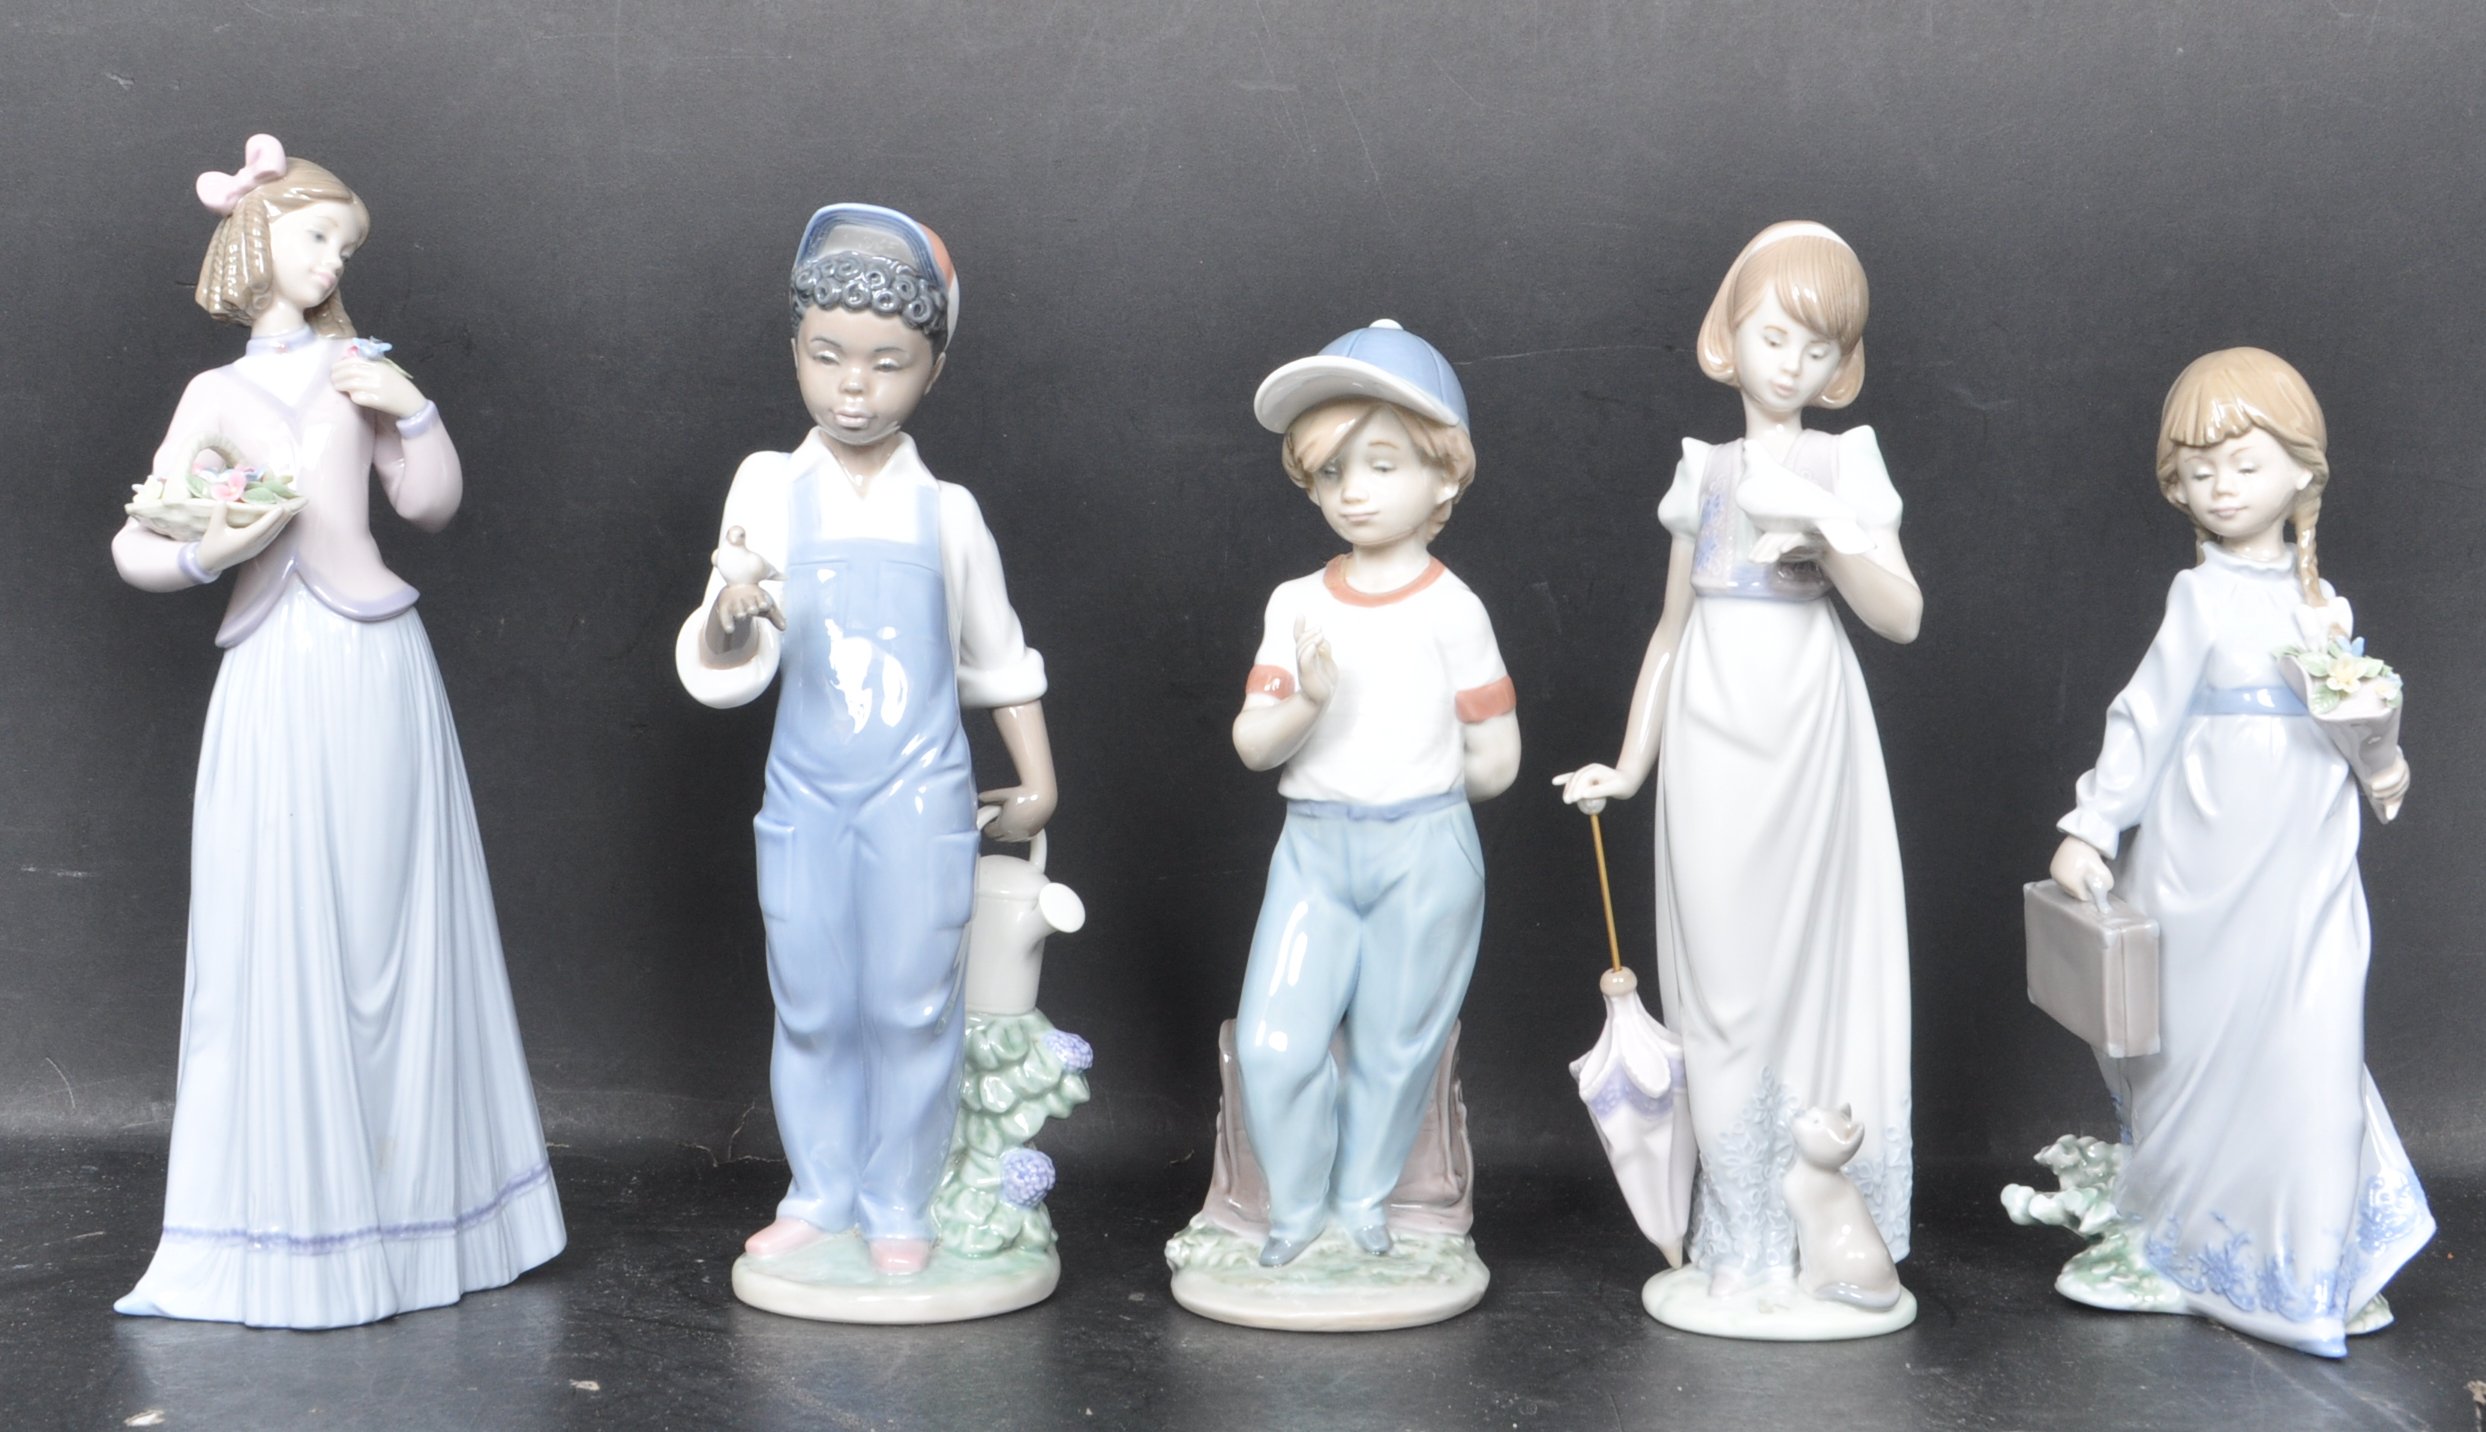 COLLECTION OF FIVE SPANISH LLADRO CERAMIC PORCELAIN FIGURINES